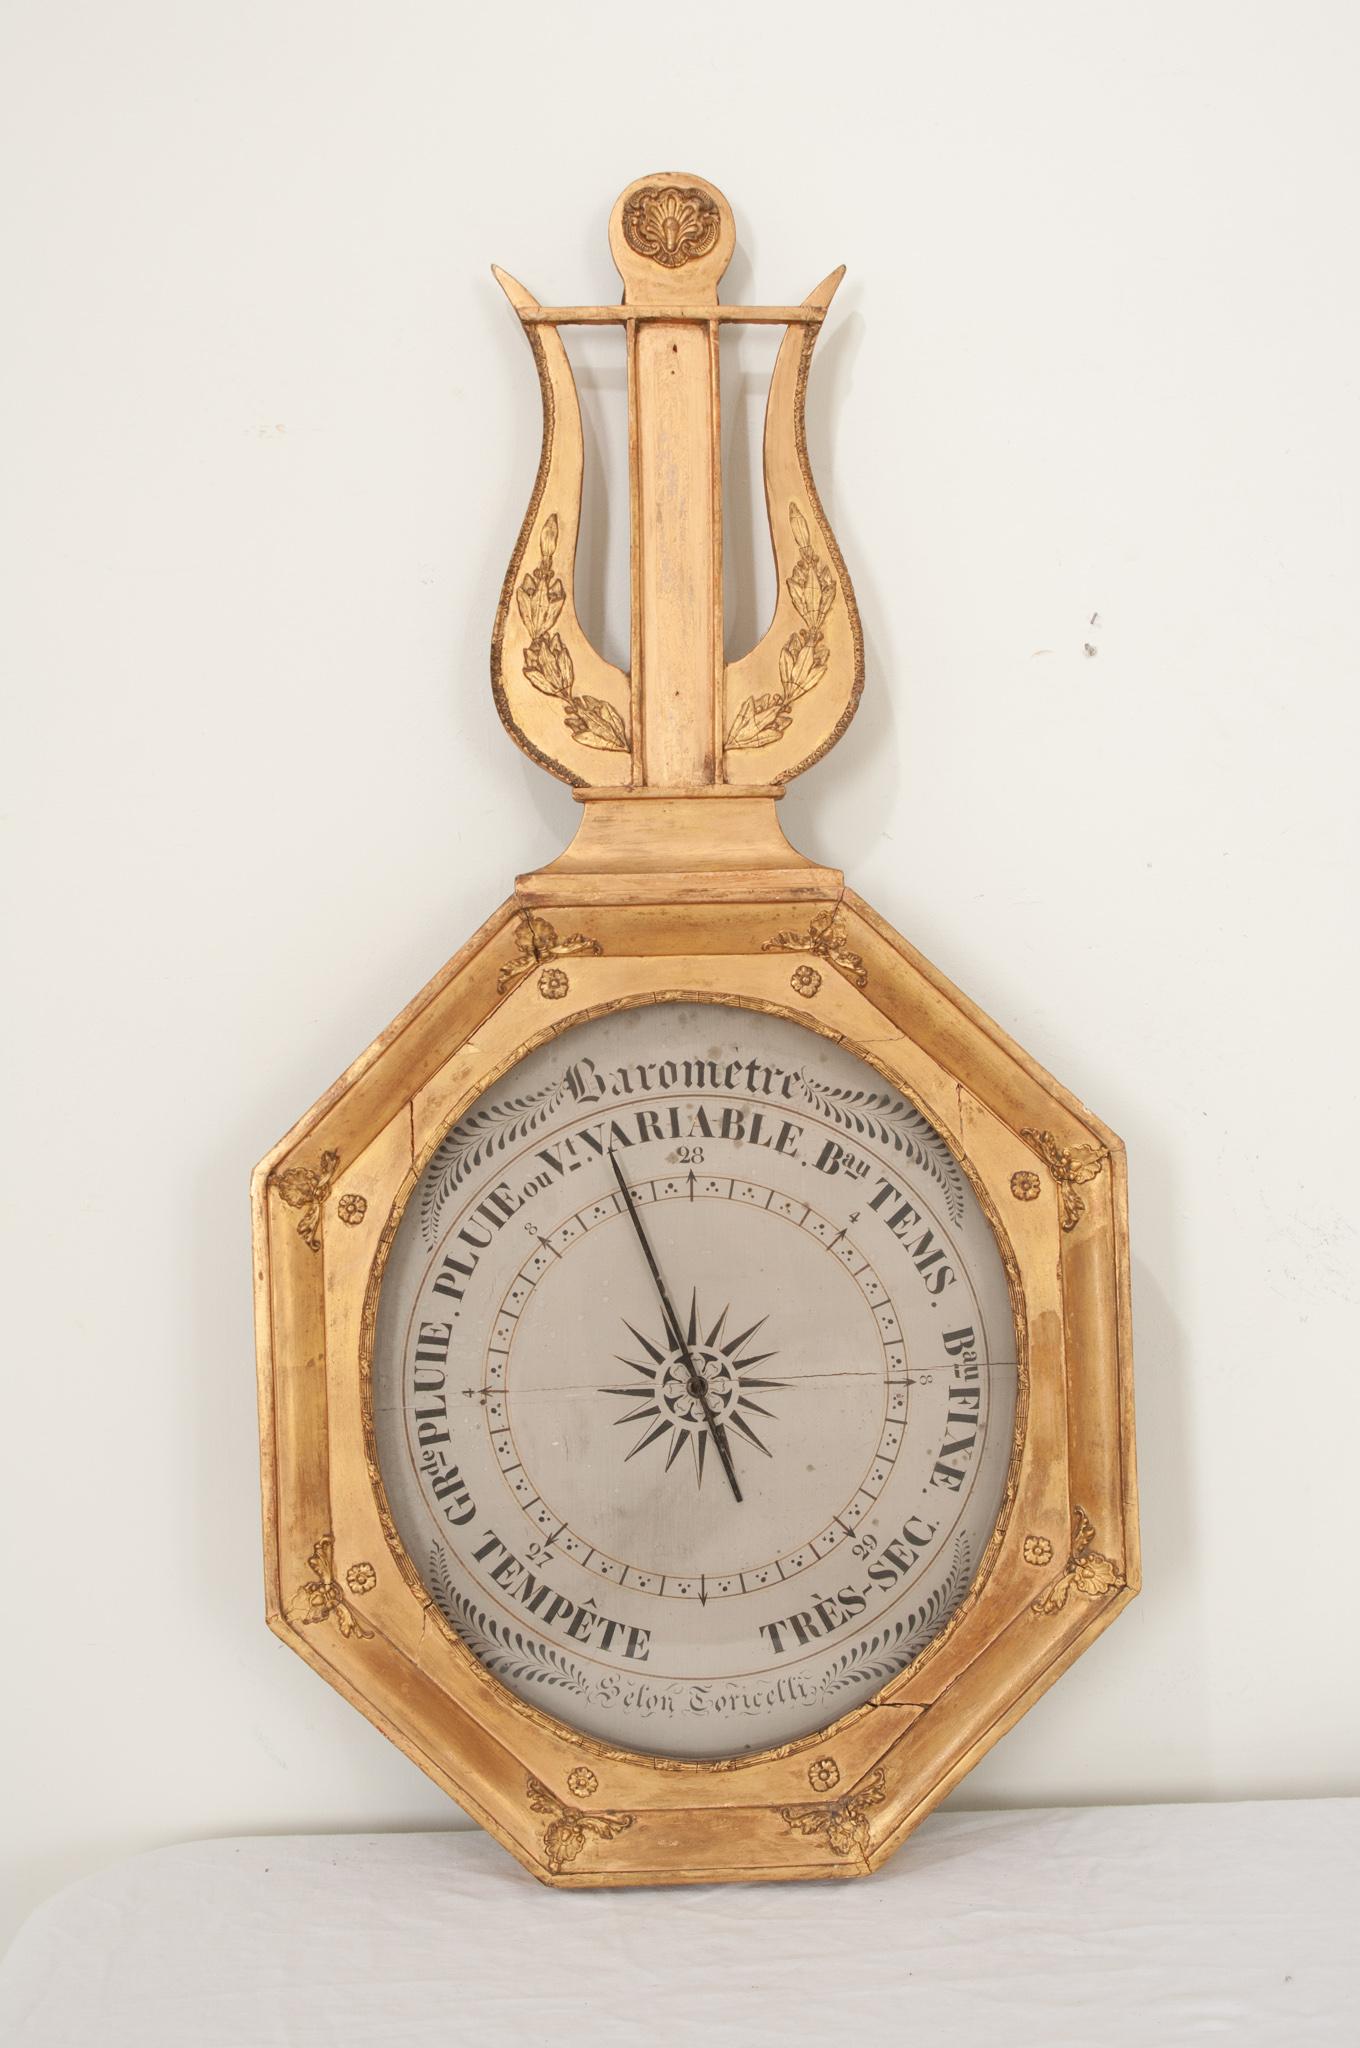 A delightful 19th Century French gold-gilt barometer circa 1850.  This early instrument of meteorology has been adorned with a molded and decoratively trimmed octagonal frame dotted with rosette and shell cartouche corners that has been painted gold